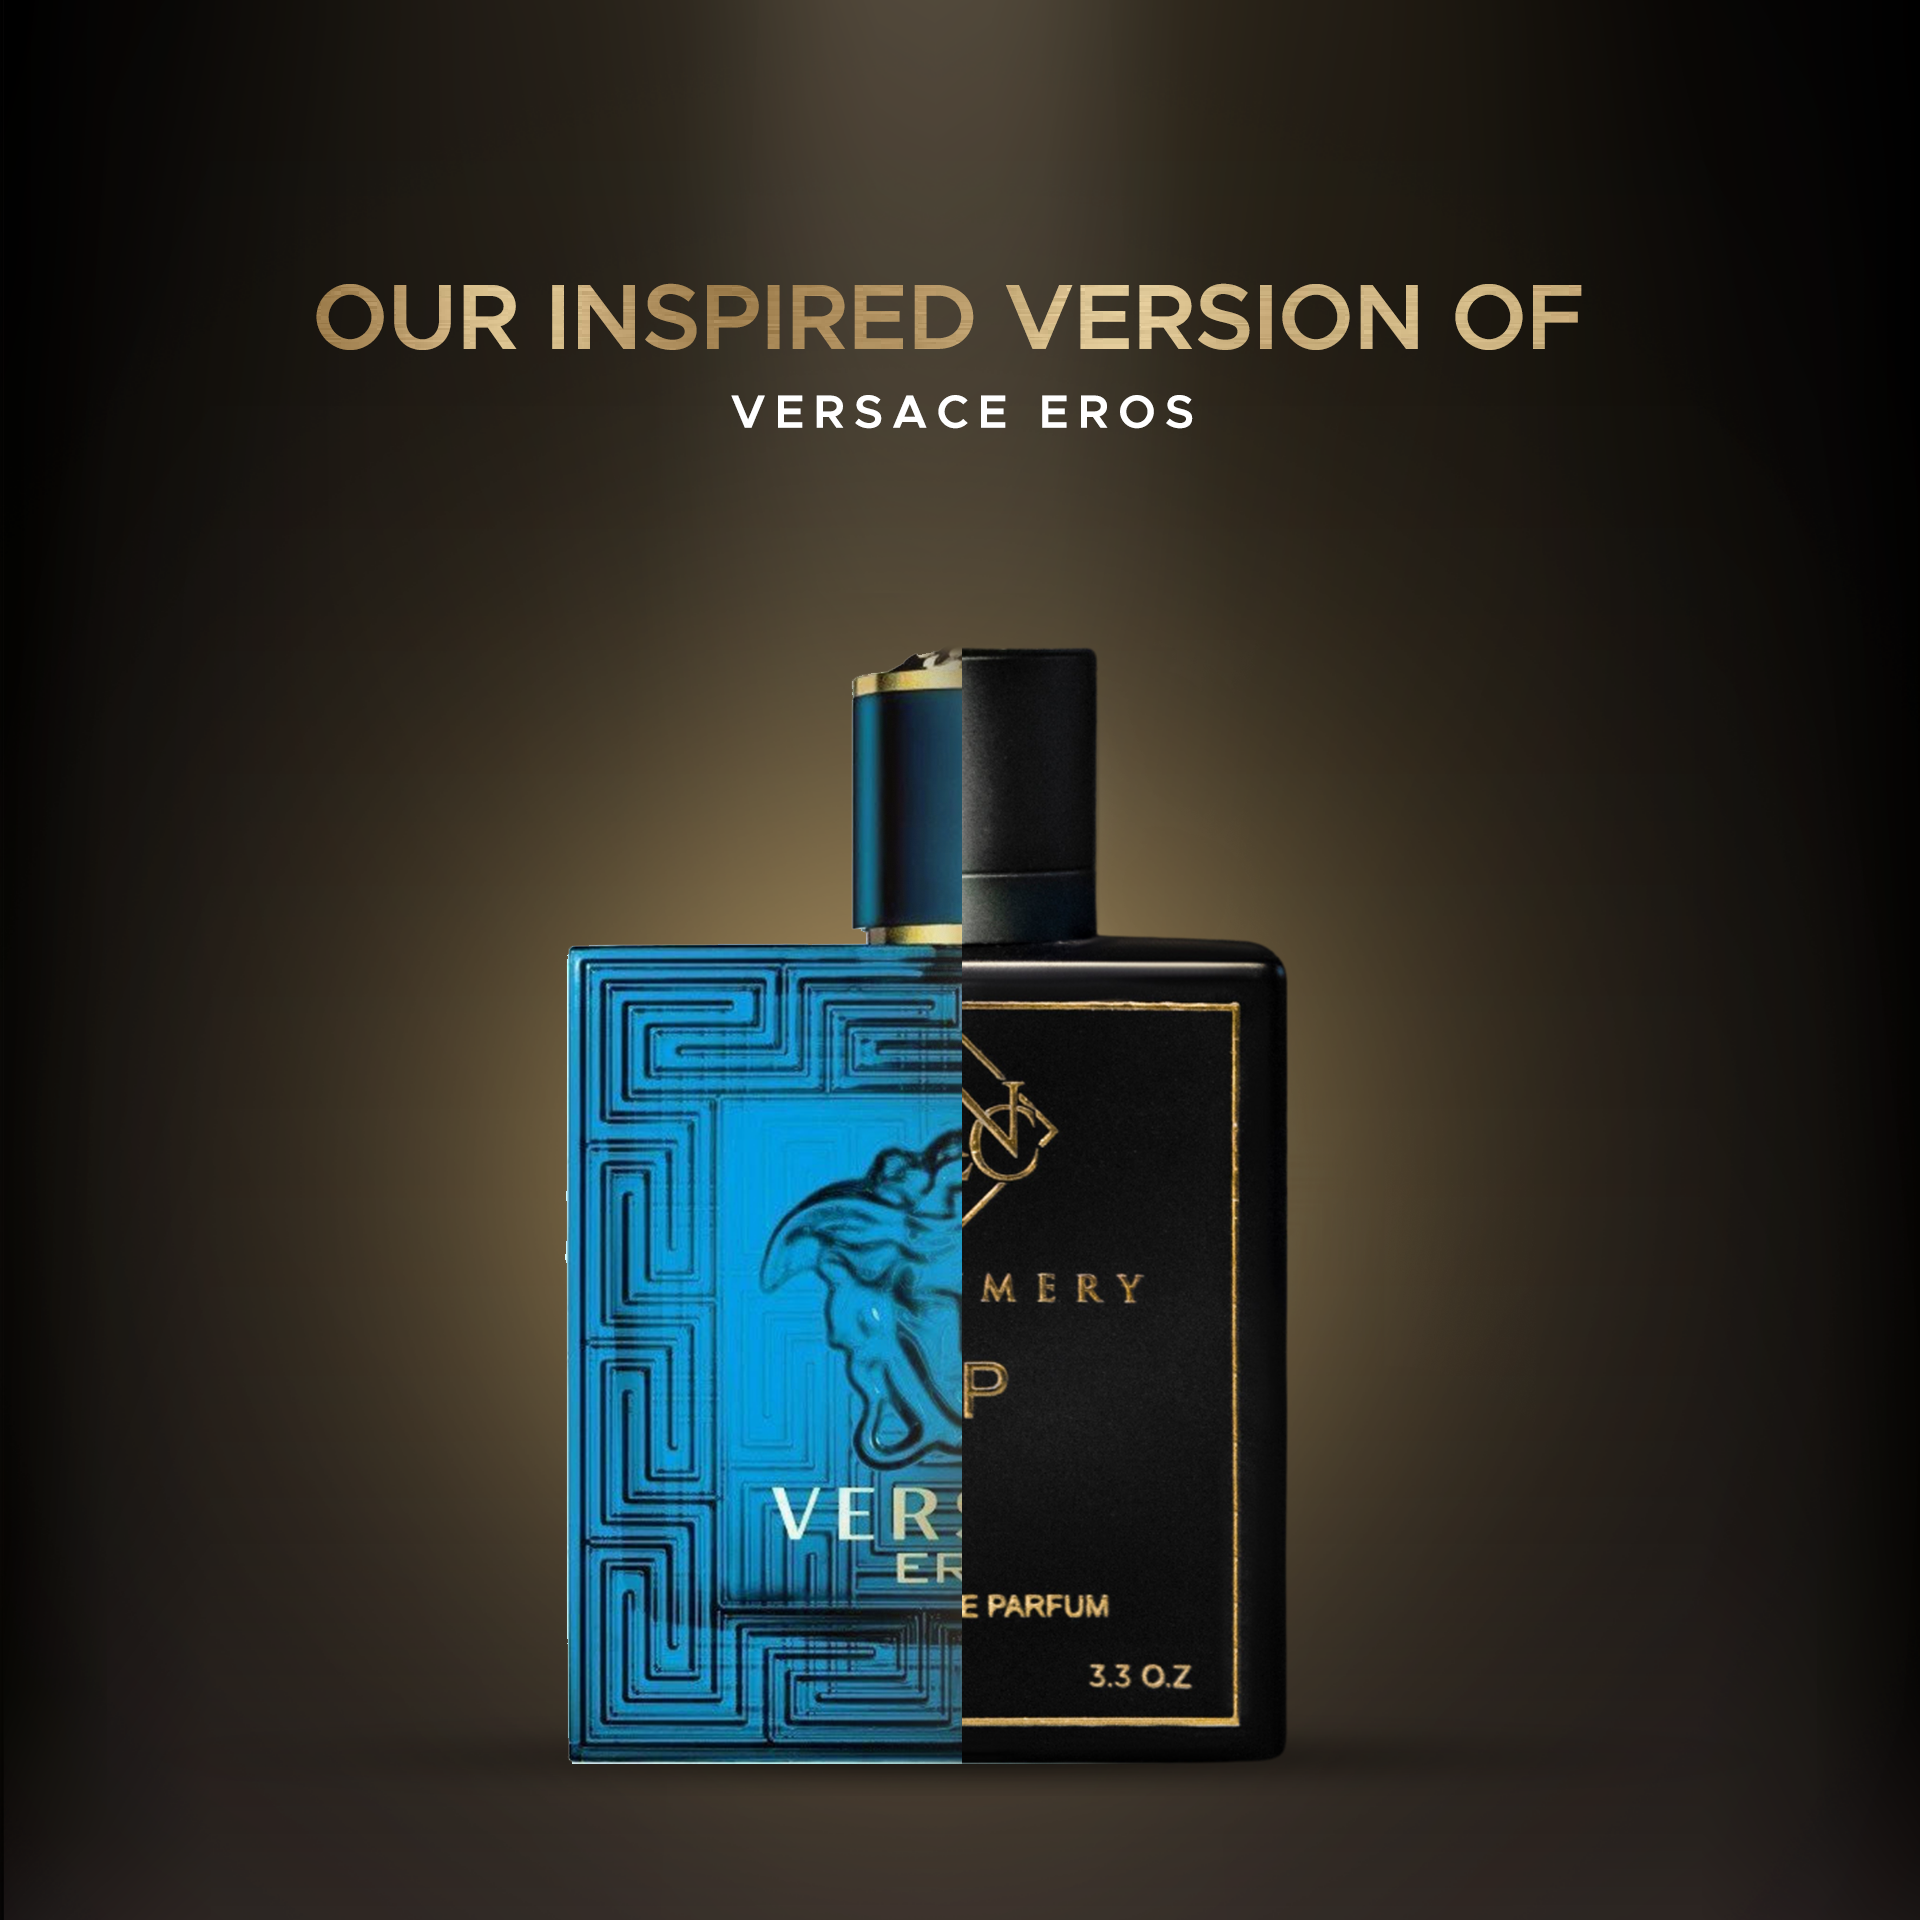  Versace Eros, Versace Eros Perfume, Versace Eros parfum, XP17, XP17 inspired perfume, XP17 inspired by Versace Eros, Inspired perfume, Perfume, Perfume for men, Perfume for women, Versace Eros Fragrantica, Versace Eros perfume price, Versace Eros perfume price in India, Versace Eros perfume notes, Versace Eros perfume clone, Versace Eros perfume men, Versace Eros perfume for her, Versace Eros inspired perfume.